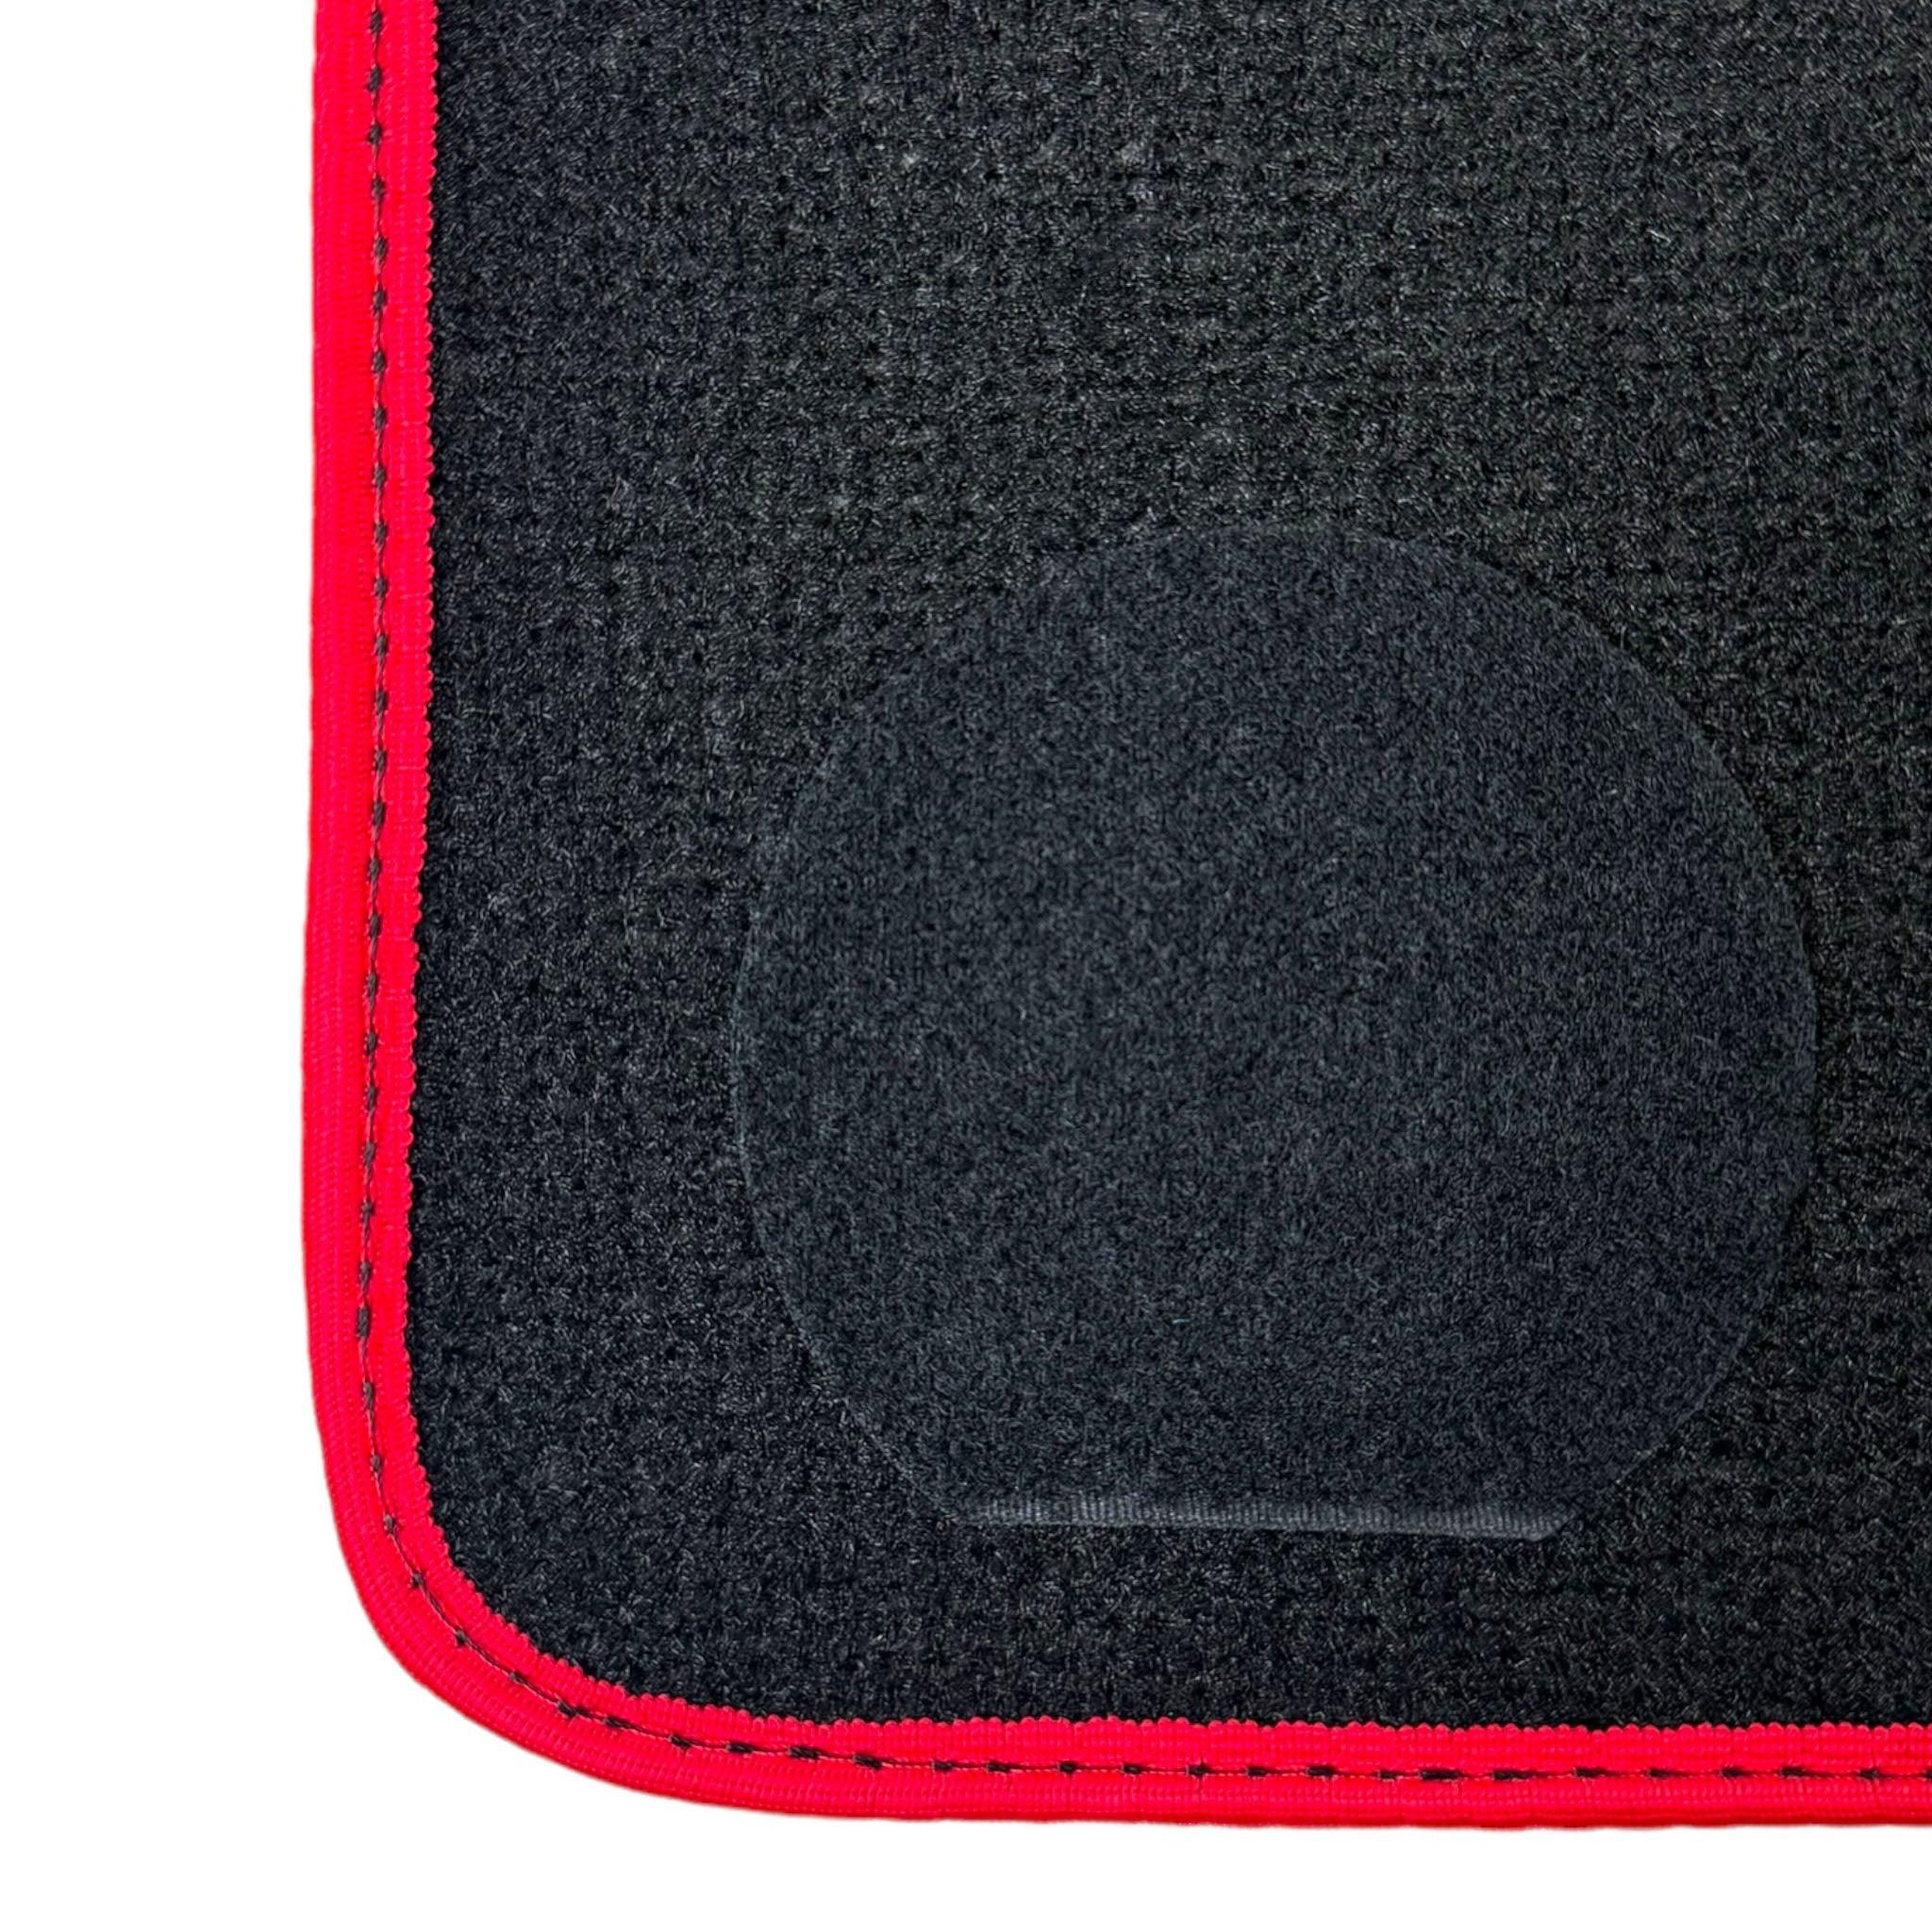 Black Floor Mats For BMW 3 Series E46 Convertible | Red Trim